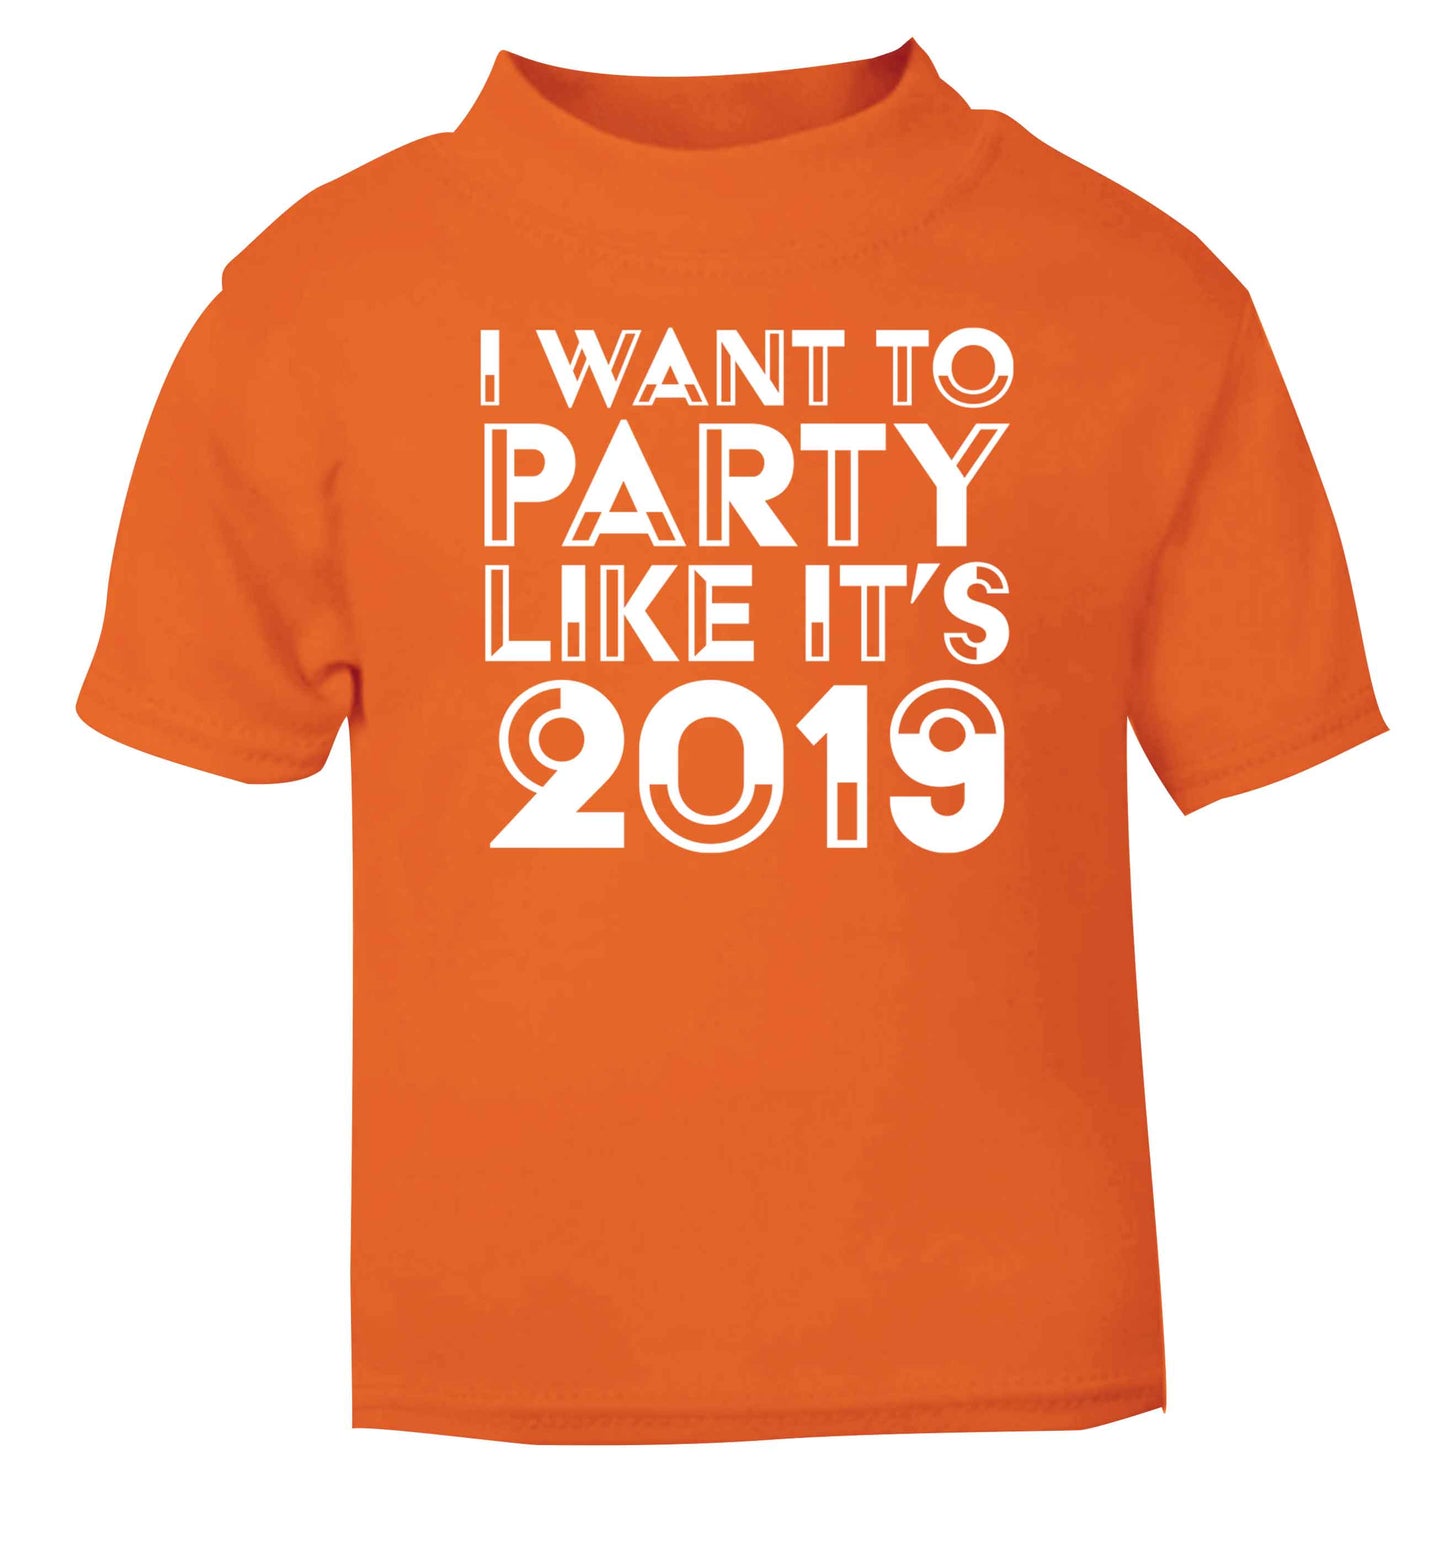 I want to party like it's 2019 orange baby toddler Tshirt 2 Years